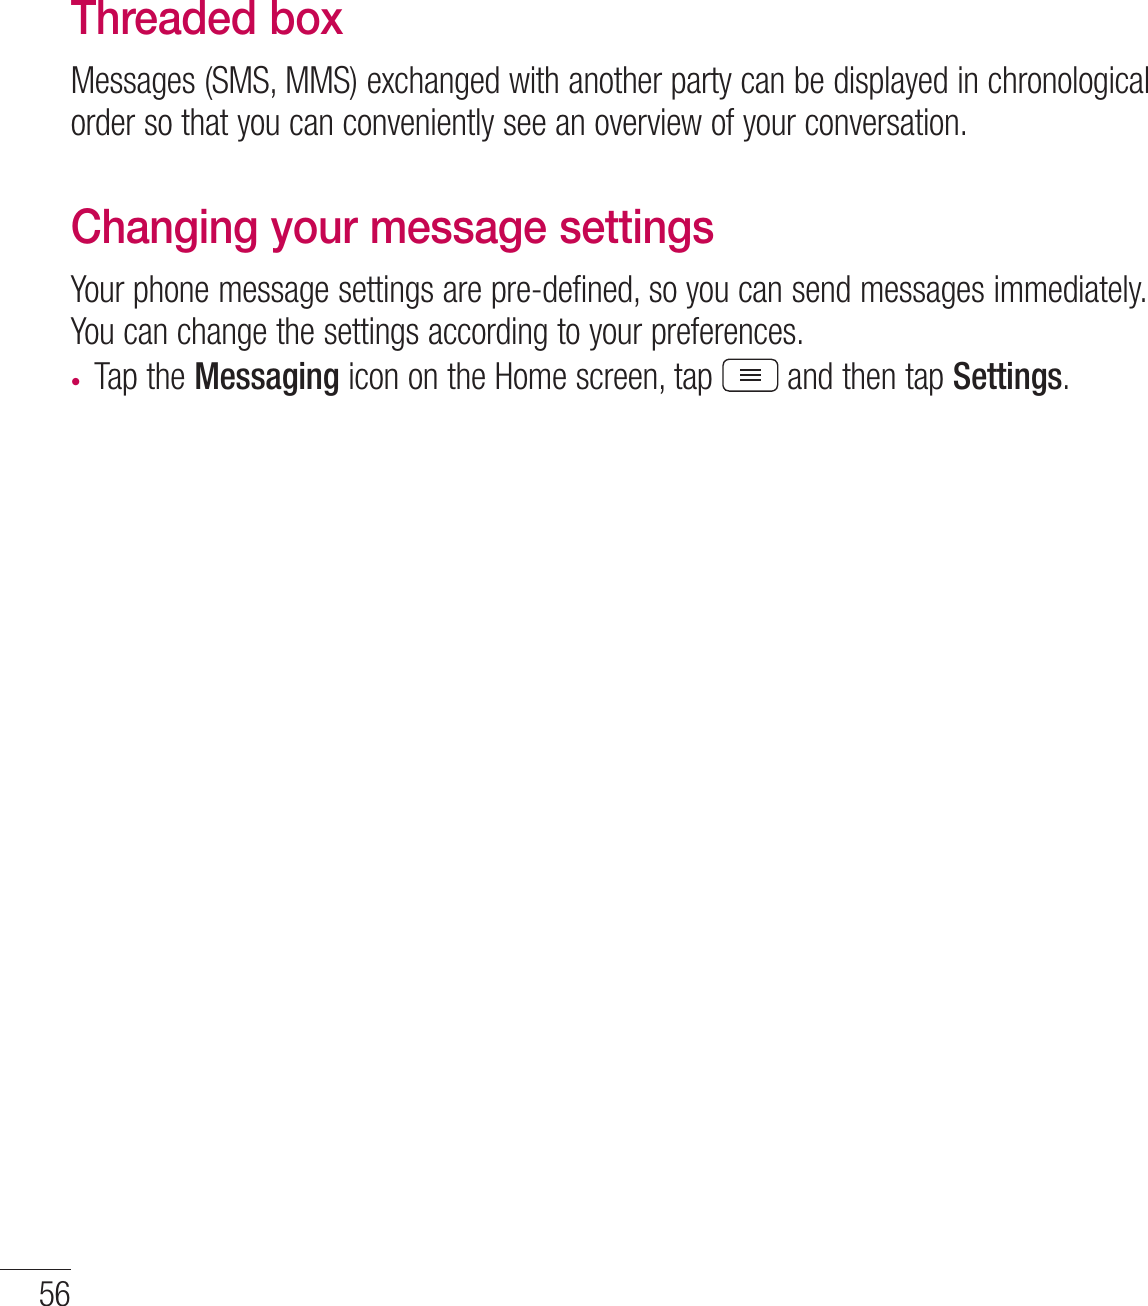 56MessagingThreaded box Messages (SMS, MMS) exchanged with another party can be displayed in chronological order so that you can conveniently see an overview of your conversation.Changing your message settingsYour phone message settings are pre-defined, so you can send messages immediately. You can change the settings according to your preferences.t Tap the Messaging icon on the Home screen, tap  and then tap Settings.